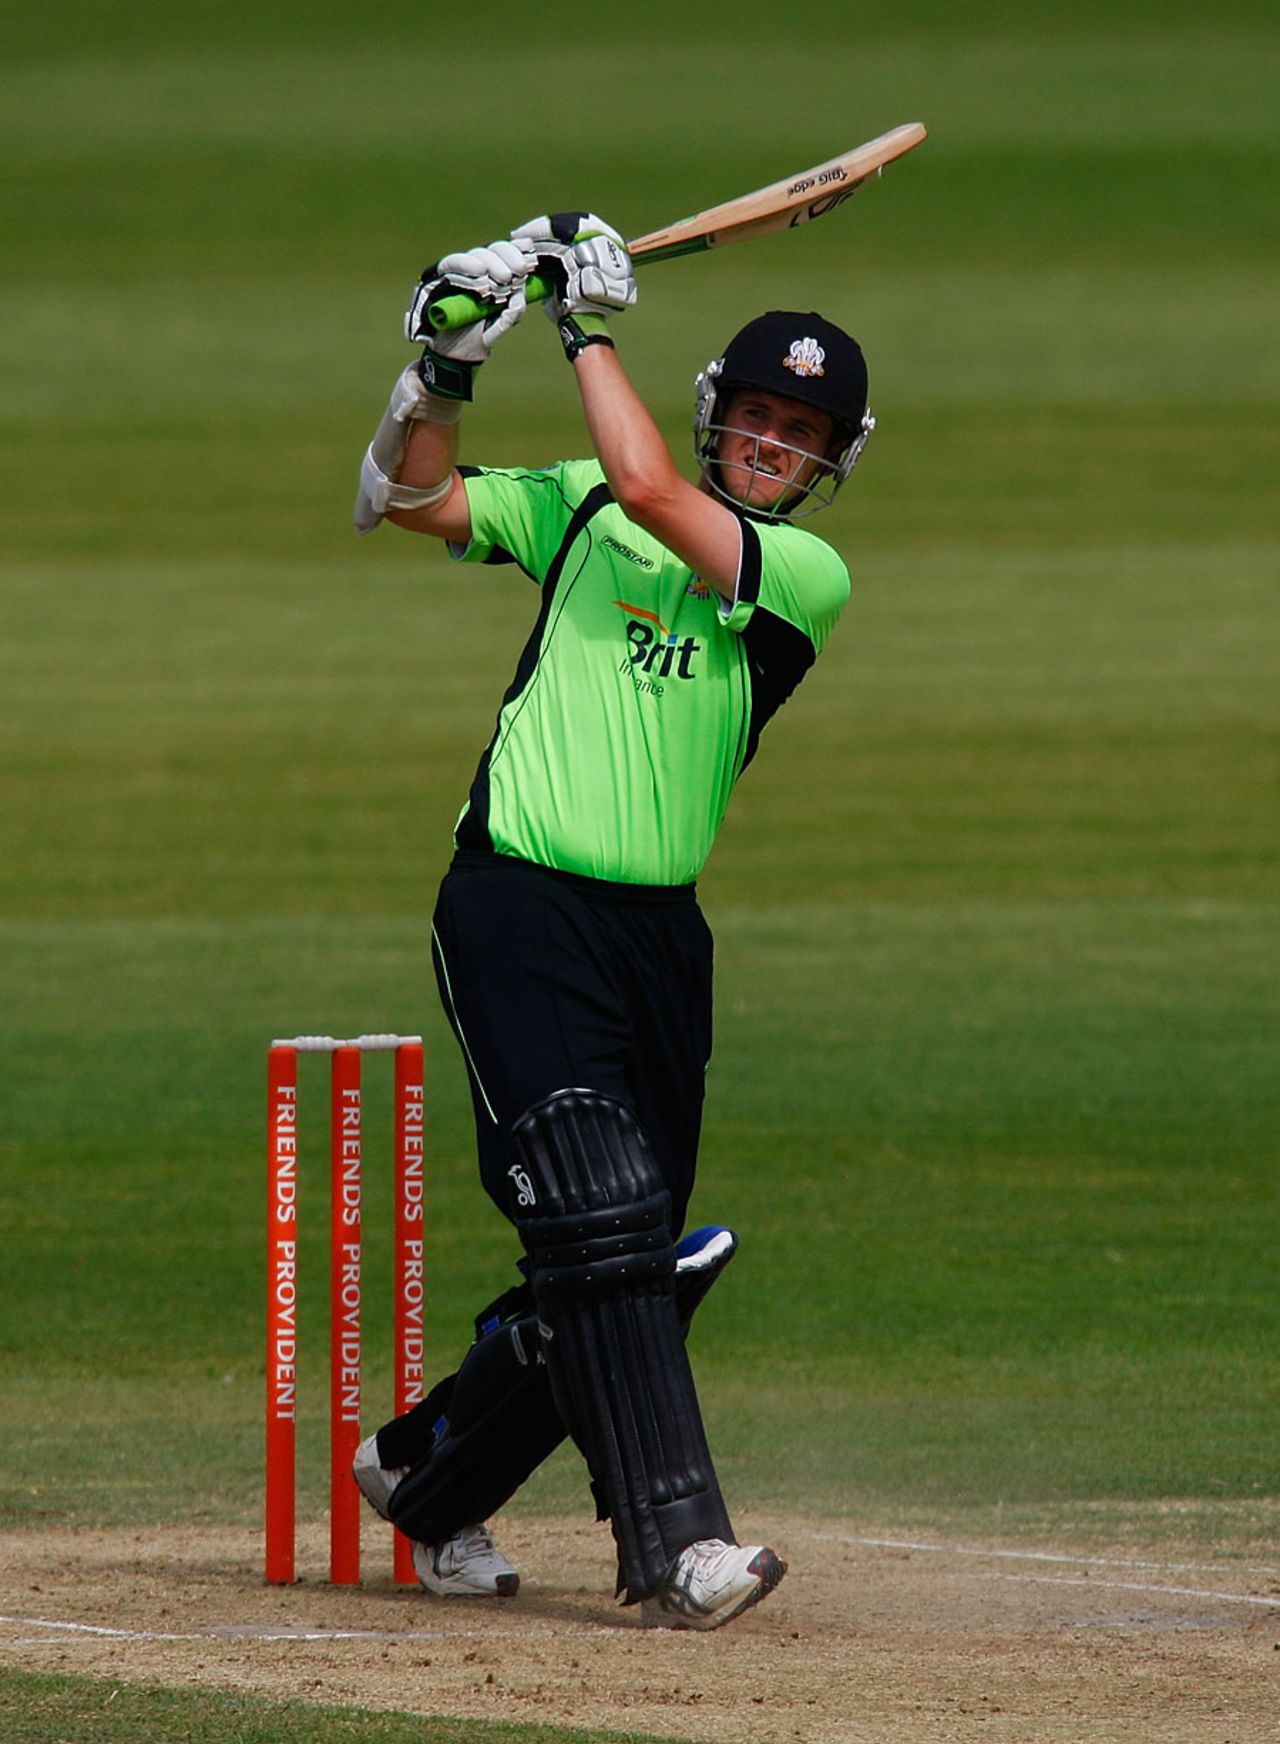 Steve Davies reached his fifty off 19 balls as he powered Surrey to victory, Gloucestershire v Surrey, Friends Provident t20, Bristol, July 18, 2010